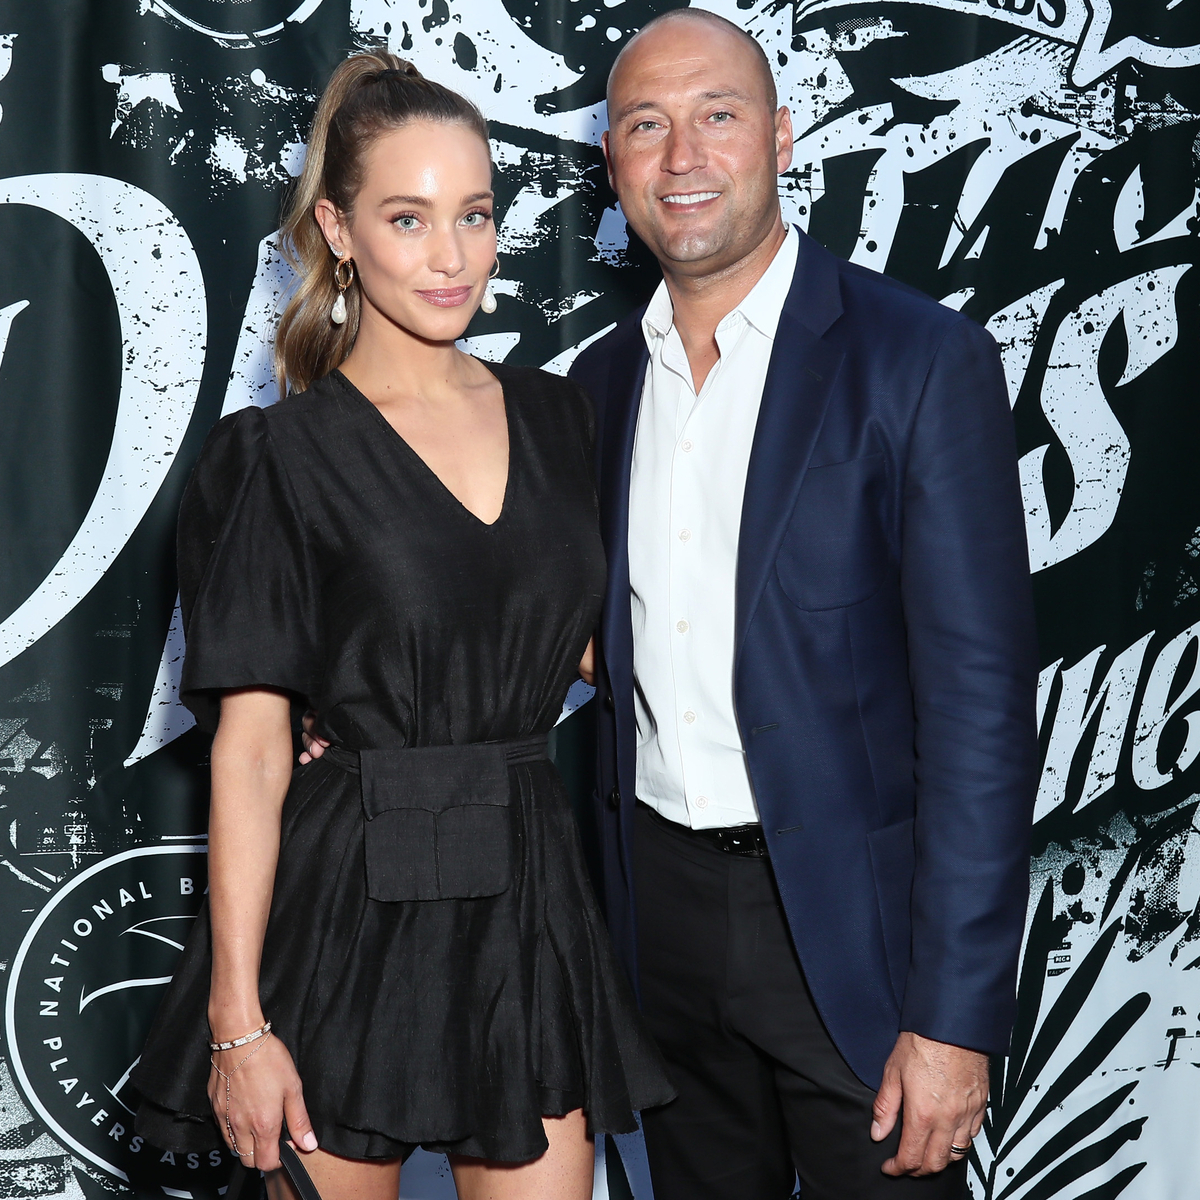 Exit Stage Center: Derek Jeter reflects on the final act of his